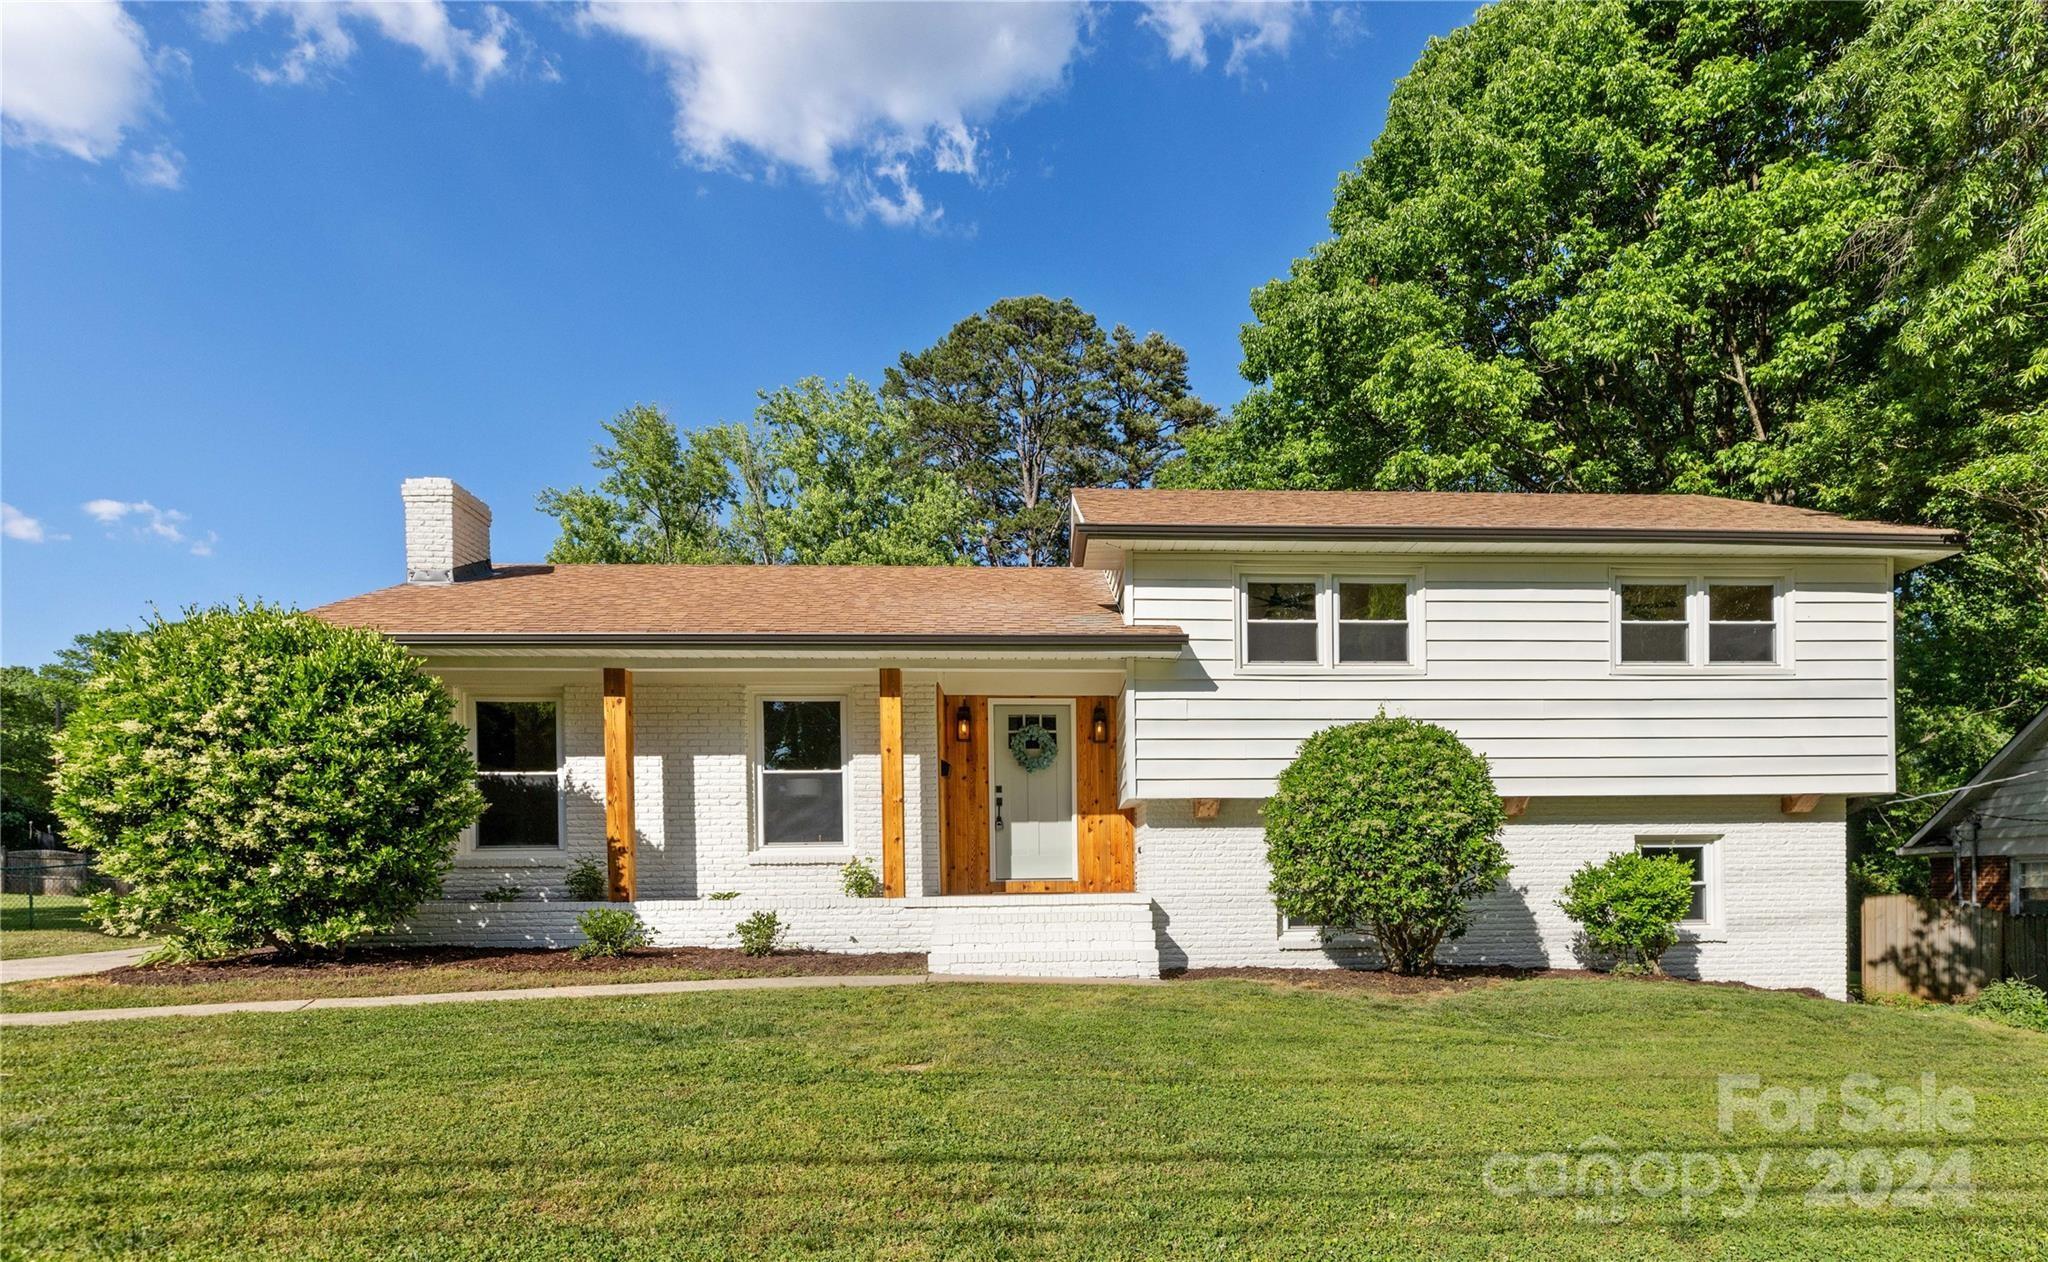 Property Image for 2117 Emerywood Drive